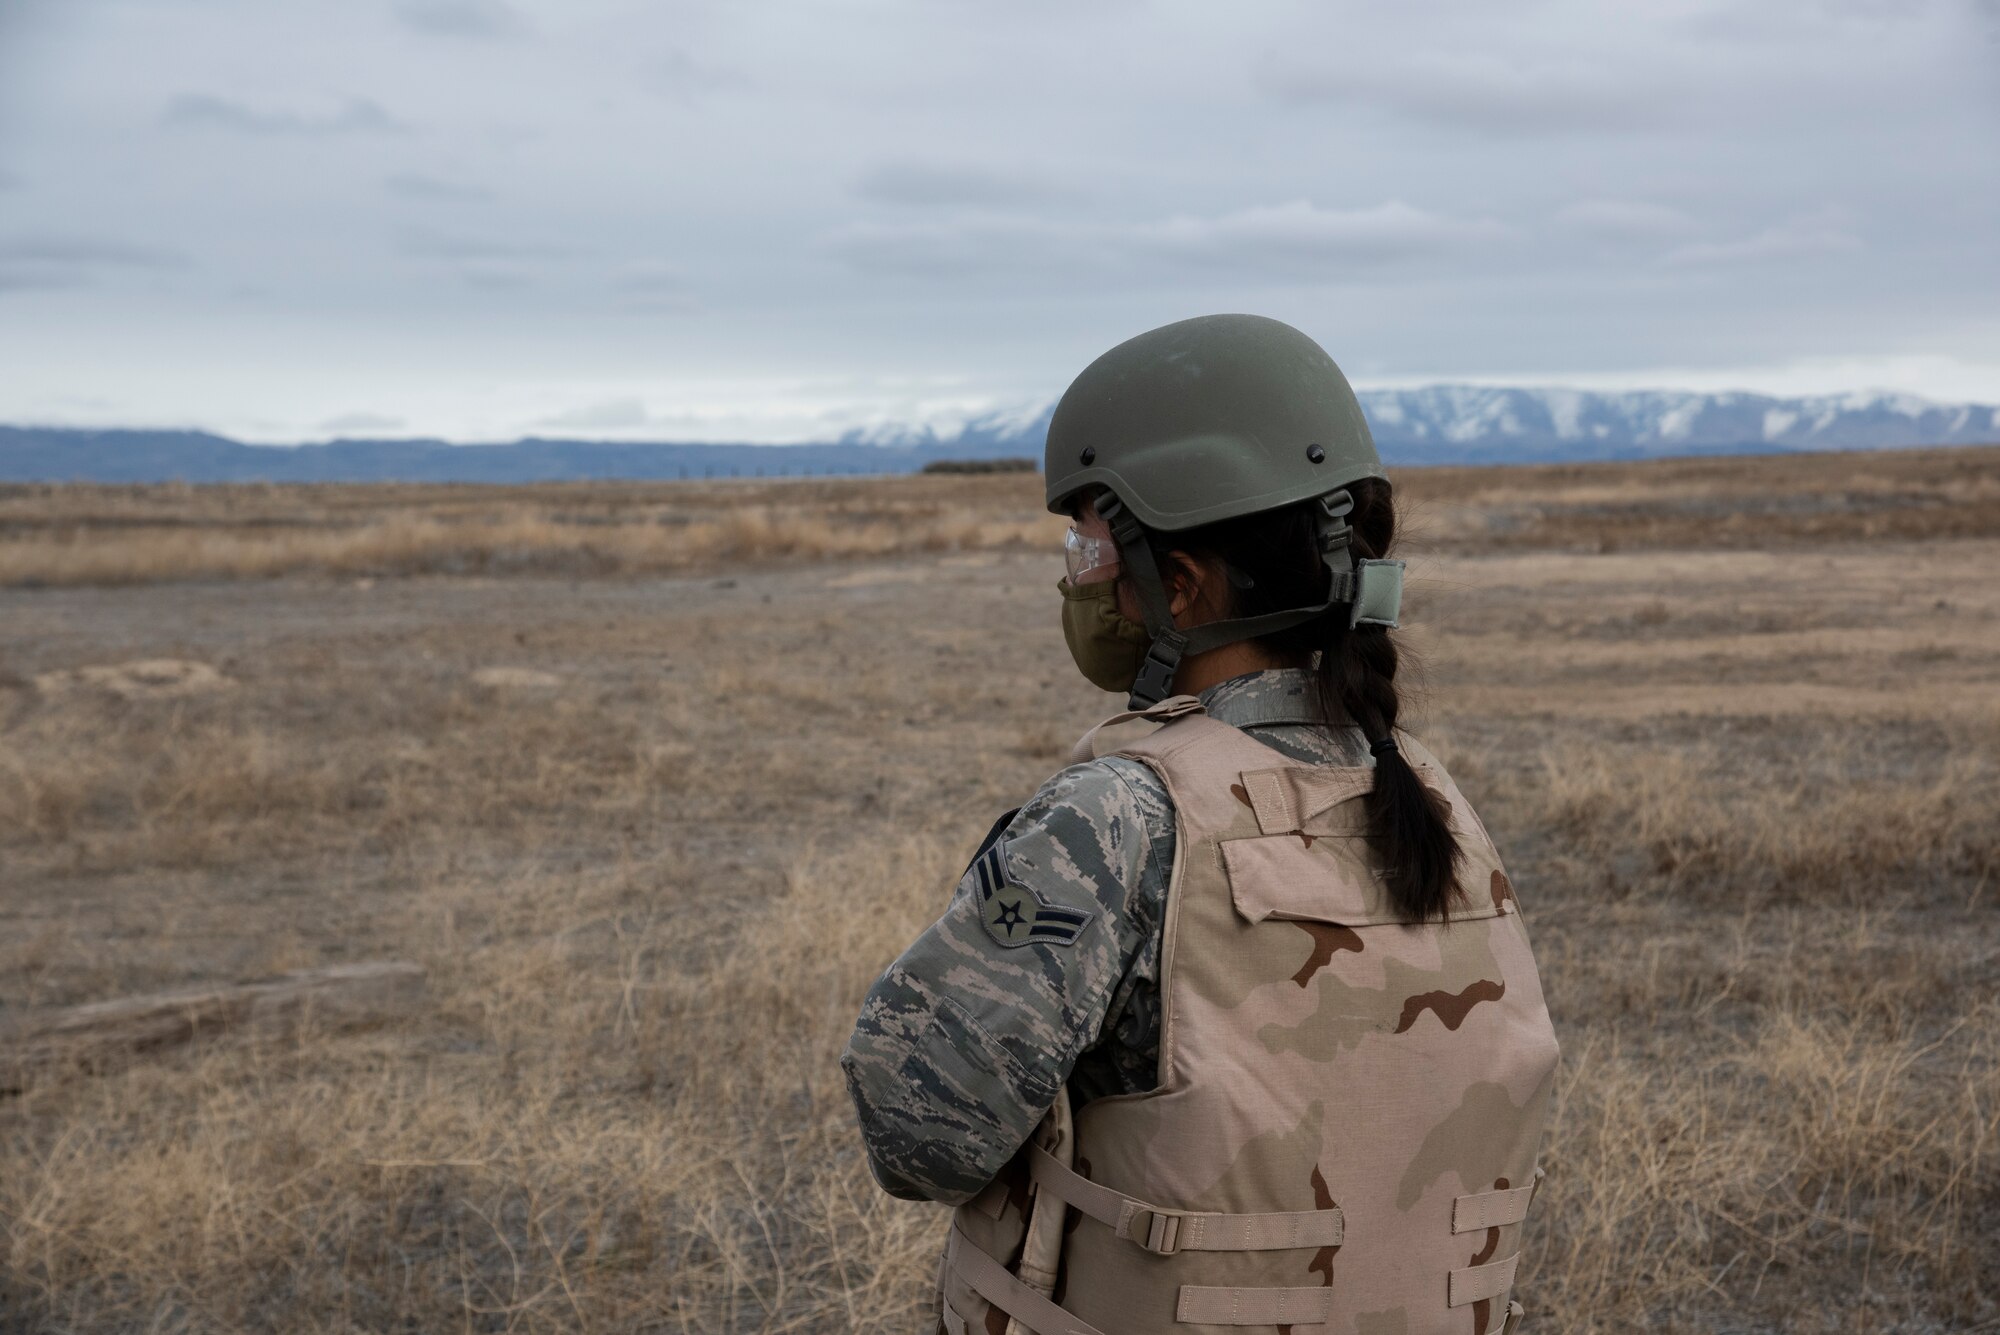 A female Airmen stands providing security for a tactical training exercise.